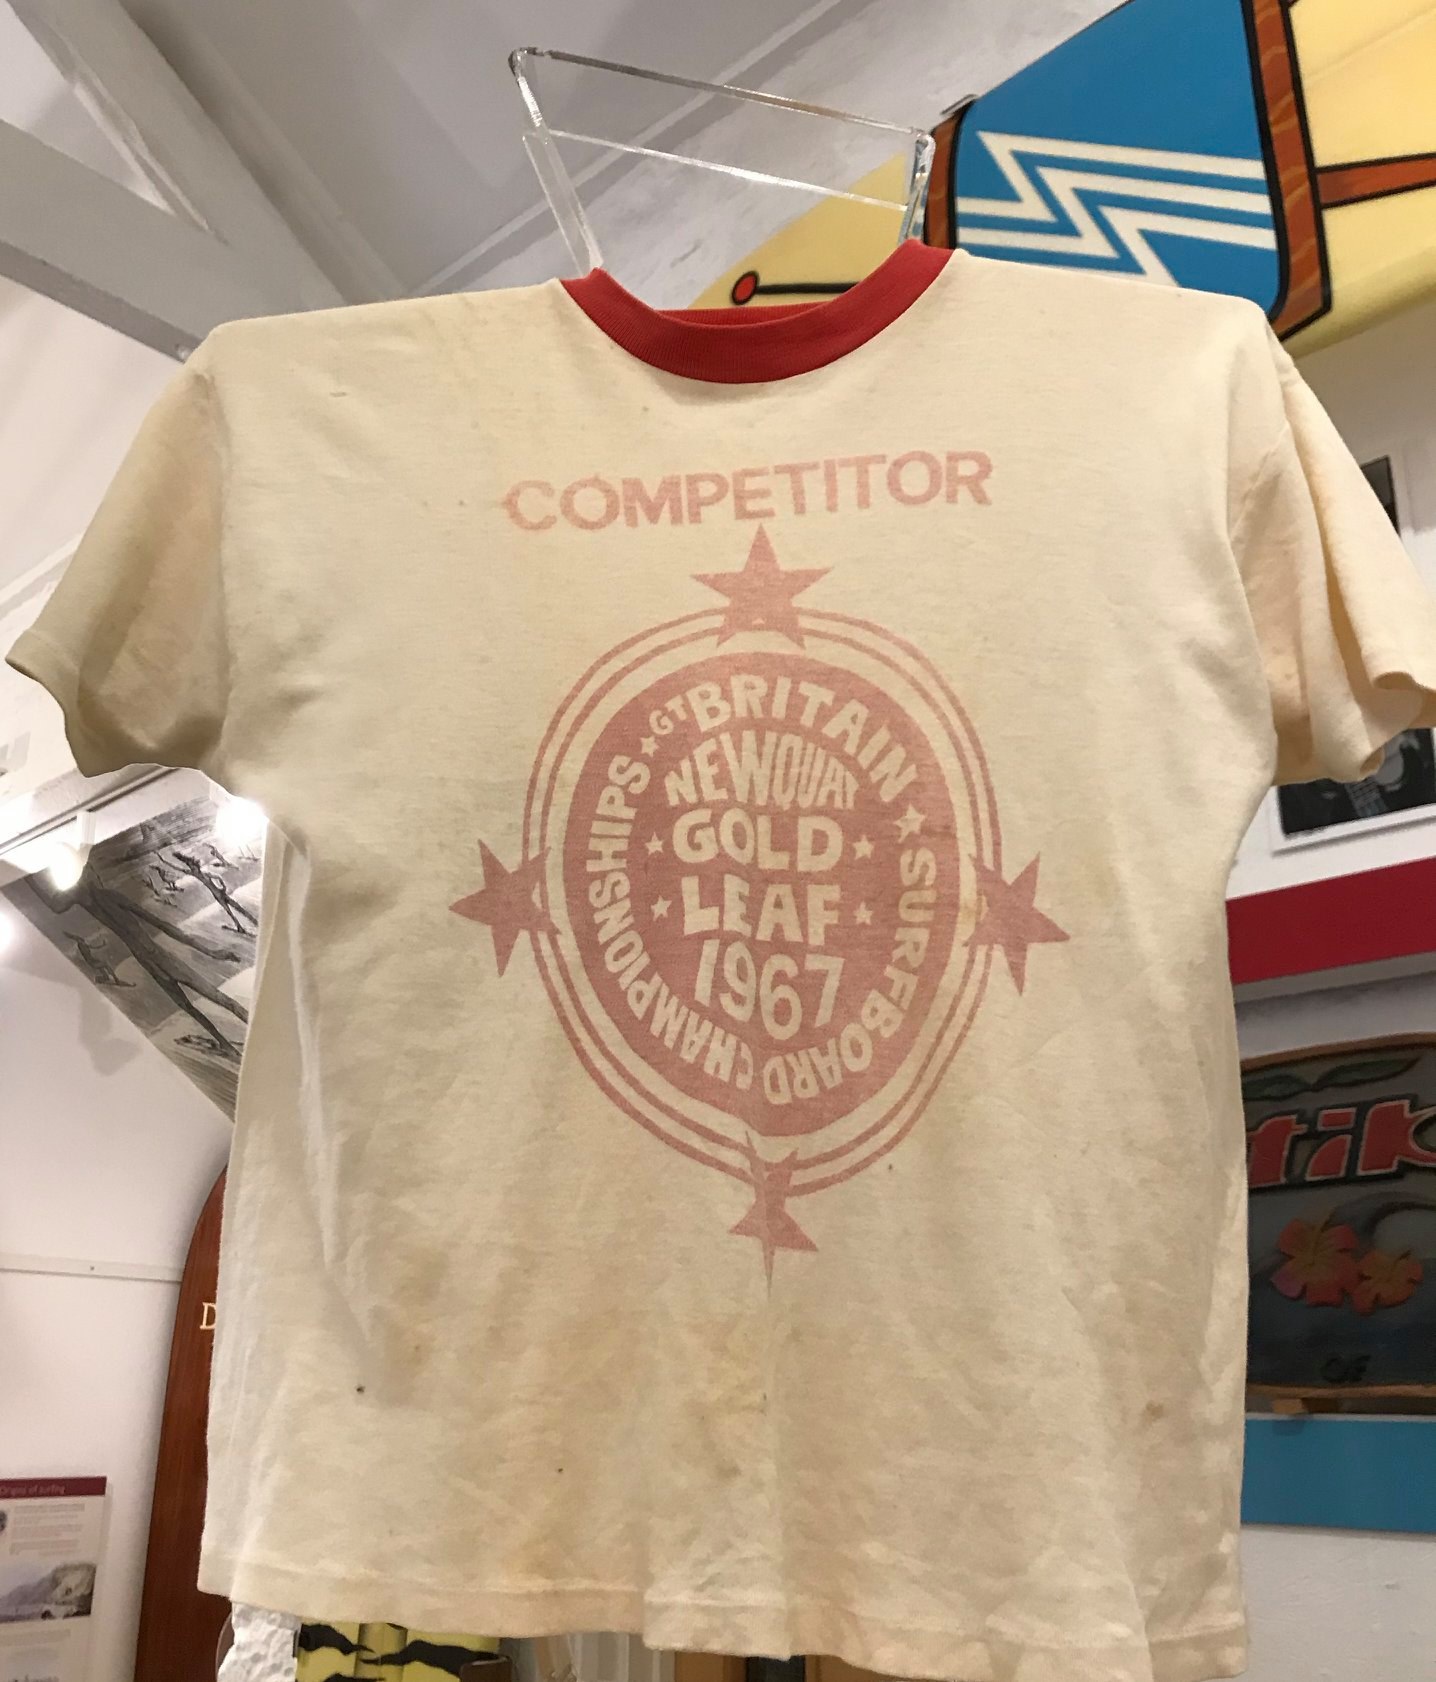 Original T-Shirt from First Surf Competitions Held at Fistral Beach